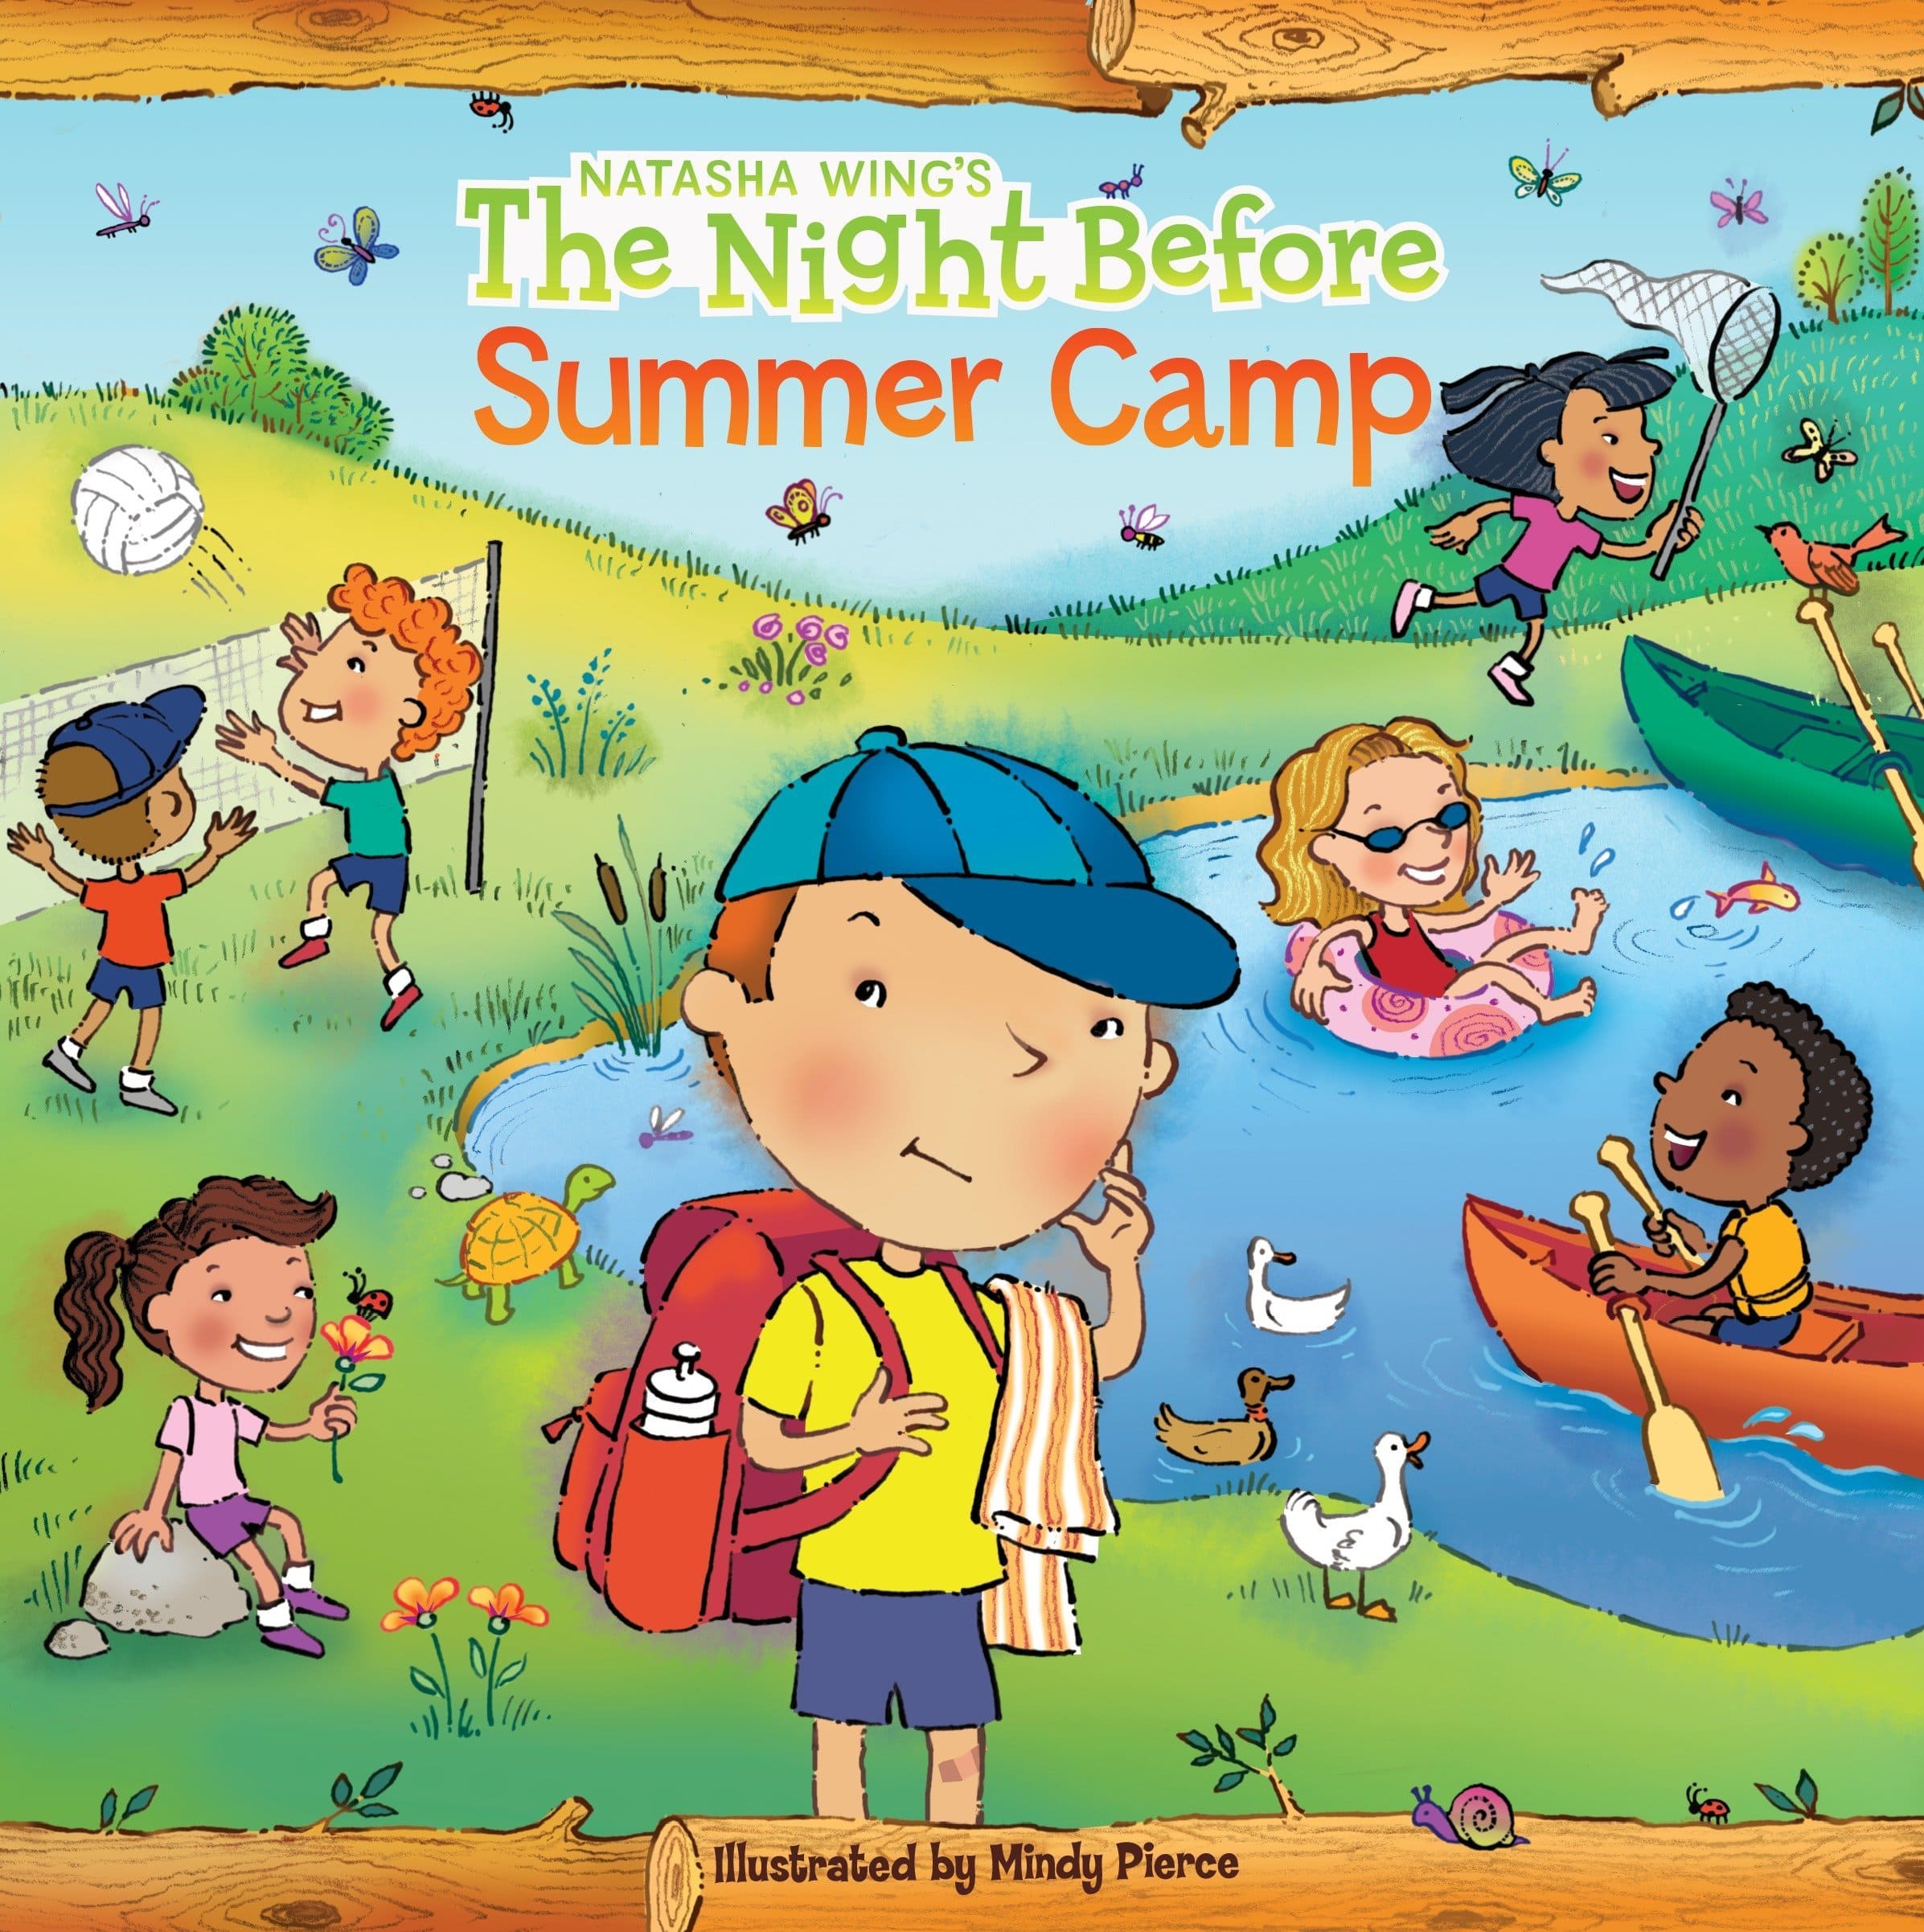 IMG : The night Before Summer Camp